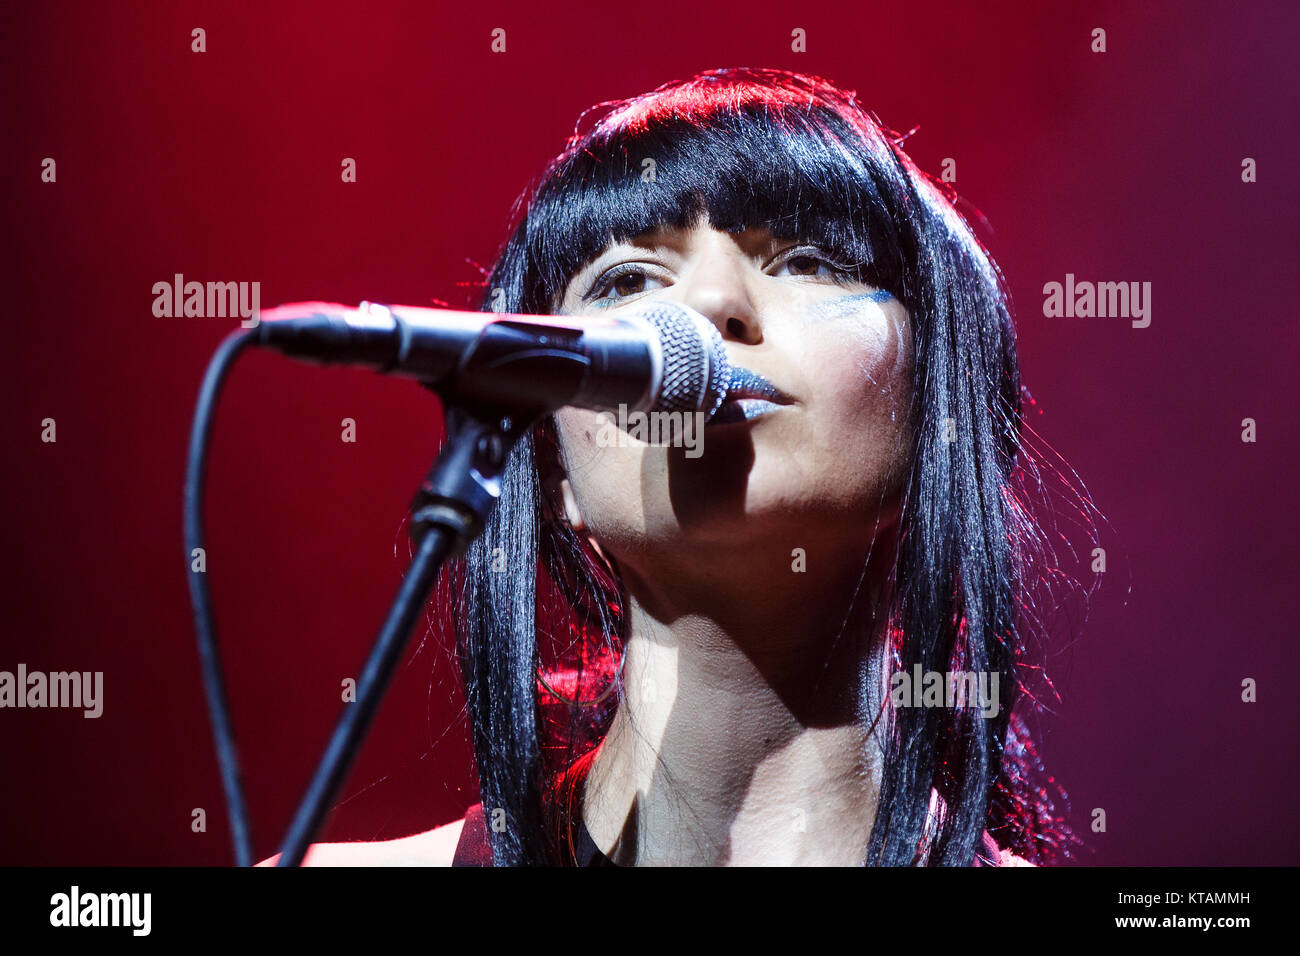 The Americna Thai-funk band Khruangbin performs a live concert at Falconer Salen in Copenhagen. Here bass player and singer Laura Lee is seen live on stage. Denmark, 29/05 2016. Stock Photo